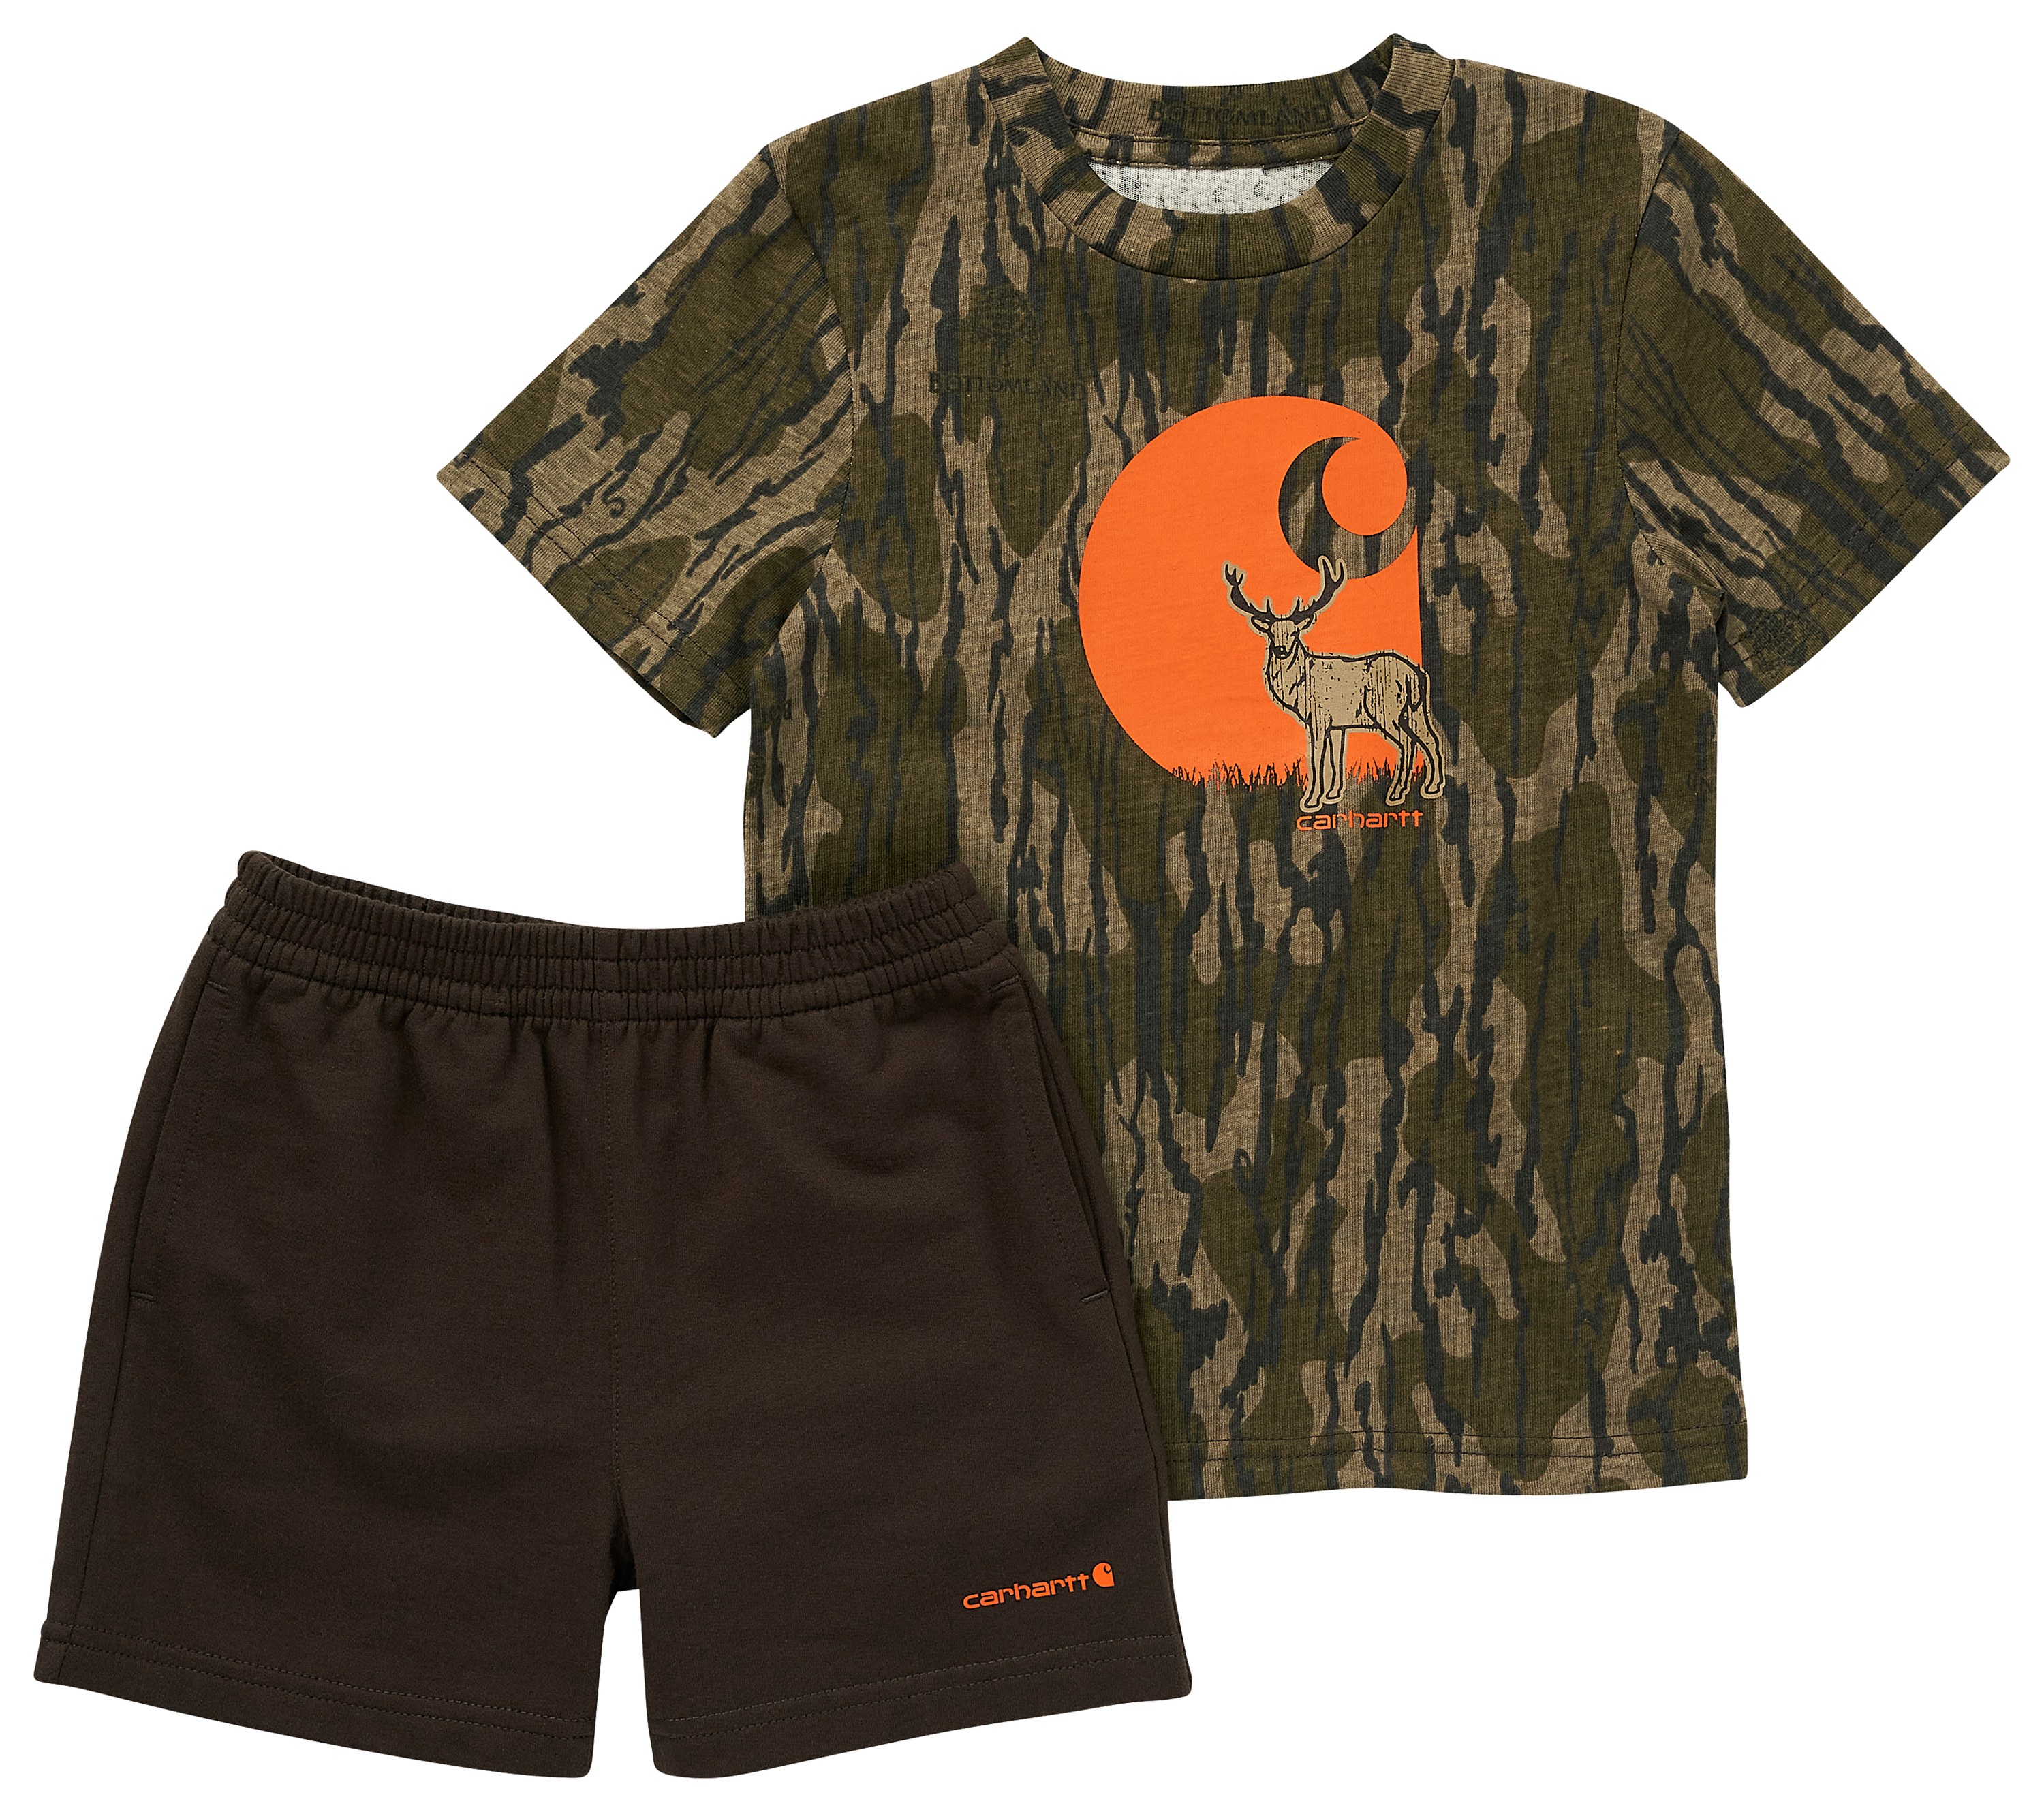 Carhartt Short-Sleeve T-Shirt and French Terry Shorts Set for Toddlers - Mossy Oak Original Bottomland - 4T